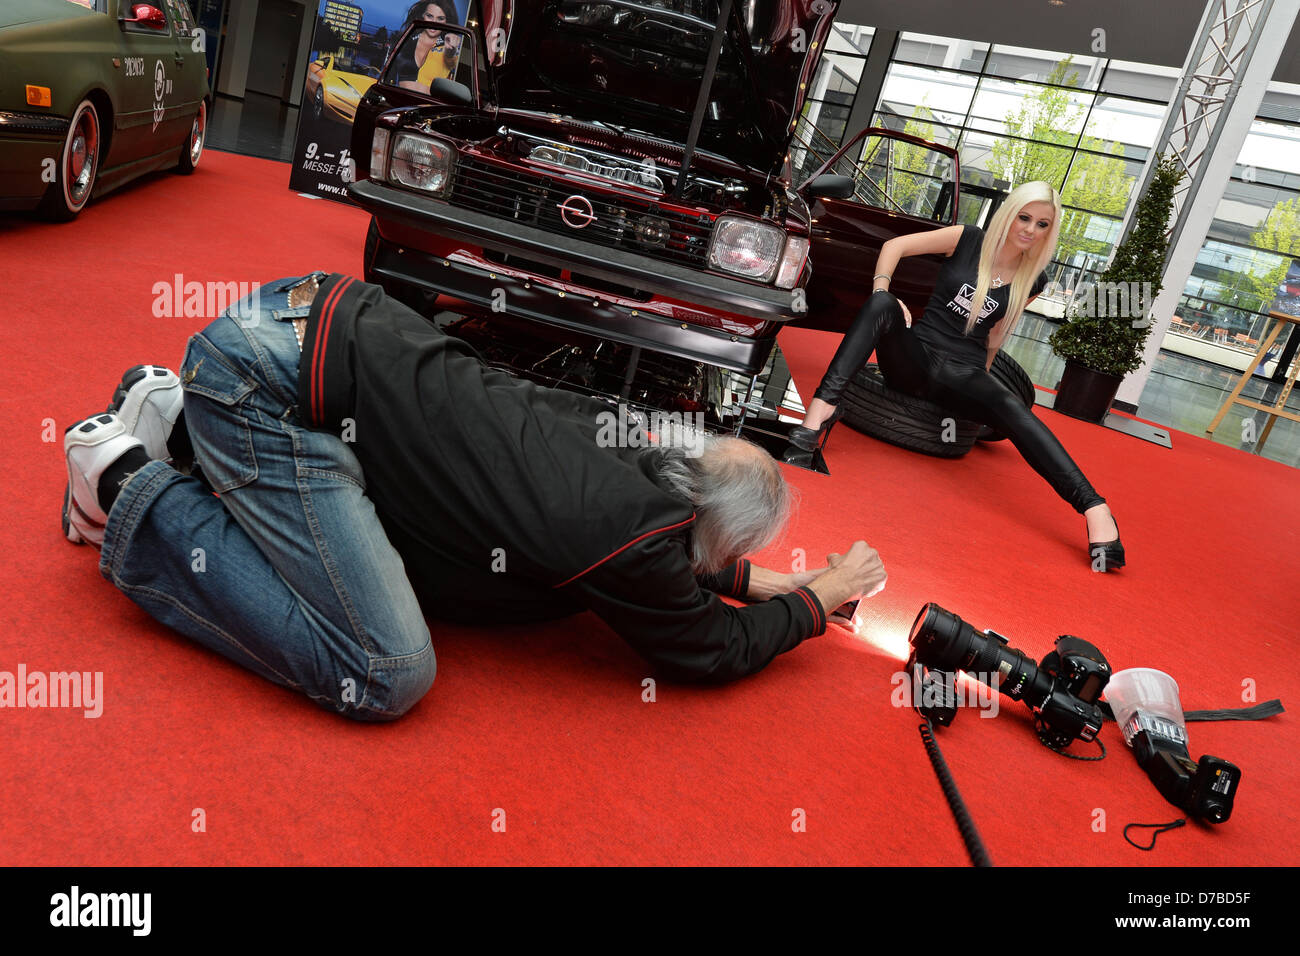 Model Kathi Beck poses next to a 'tuned' Opel Kadett C Coupe during a press tour of Tuning World Bodensee in Friedrichshafen, Germany, 03 May 2013. The car tuning trade fair Tuning World Bodensee is open from 09 until 12 May 2013. Photo: FELIX KAESTLE Stock Photo